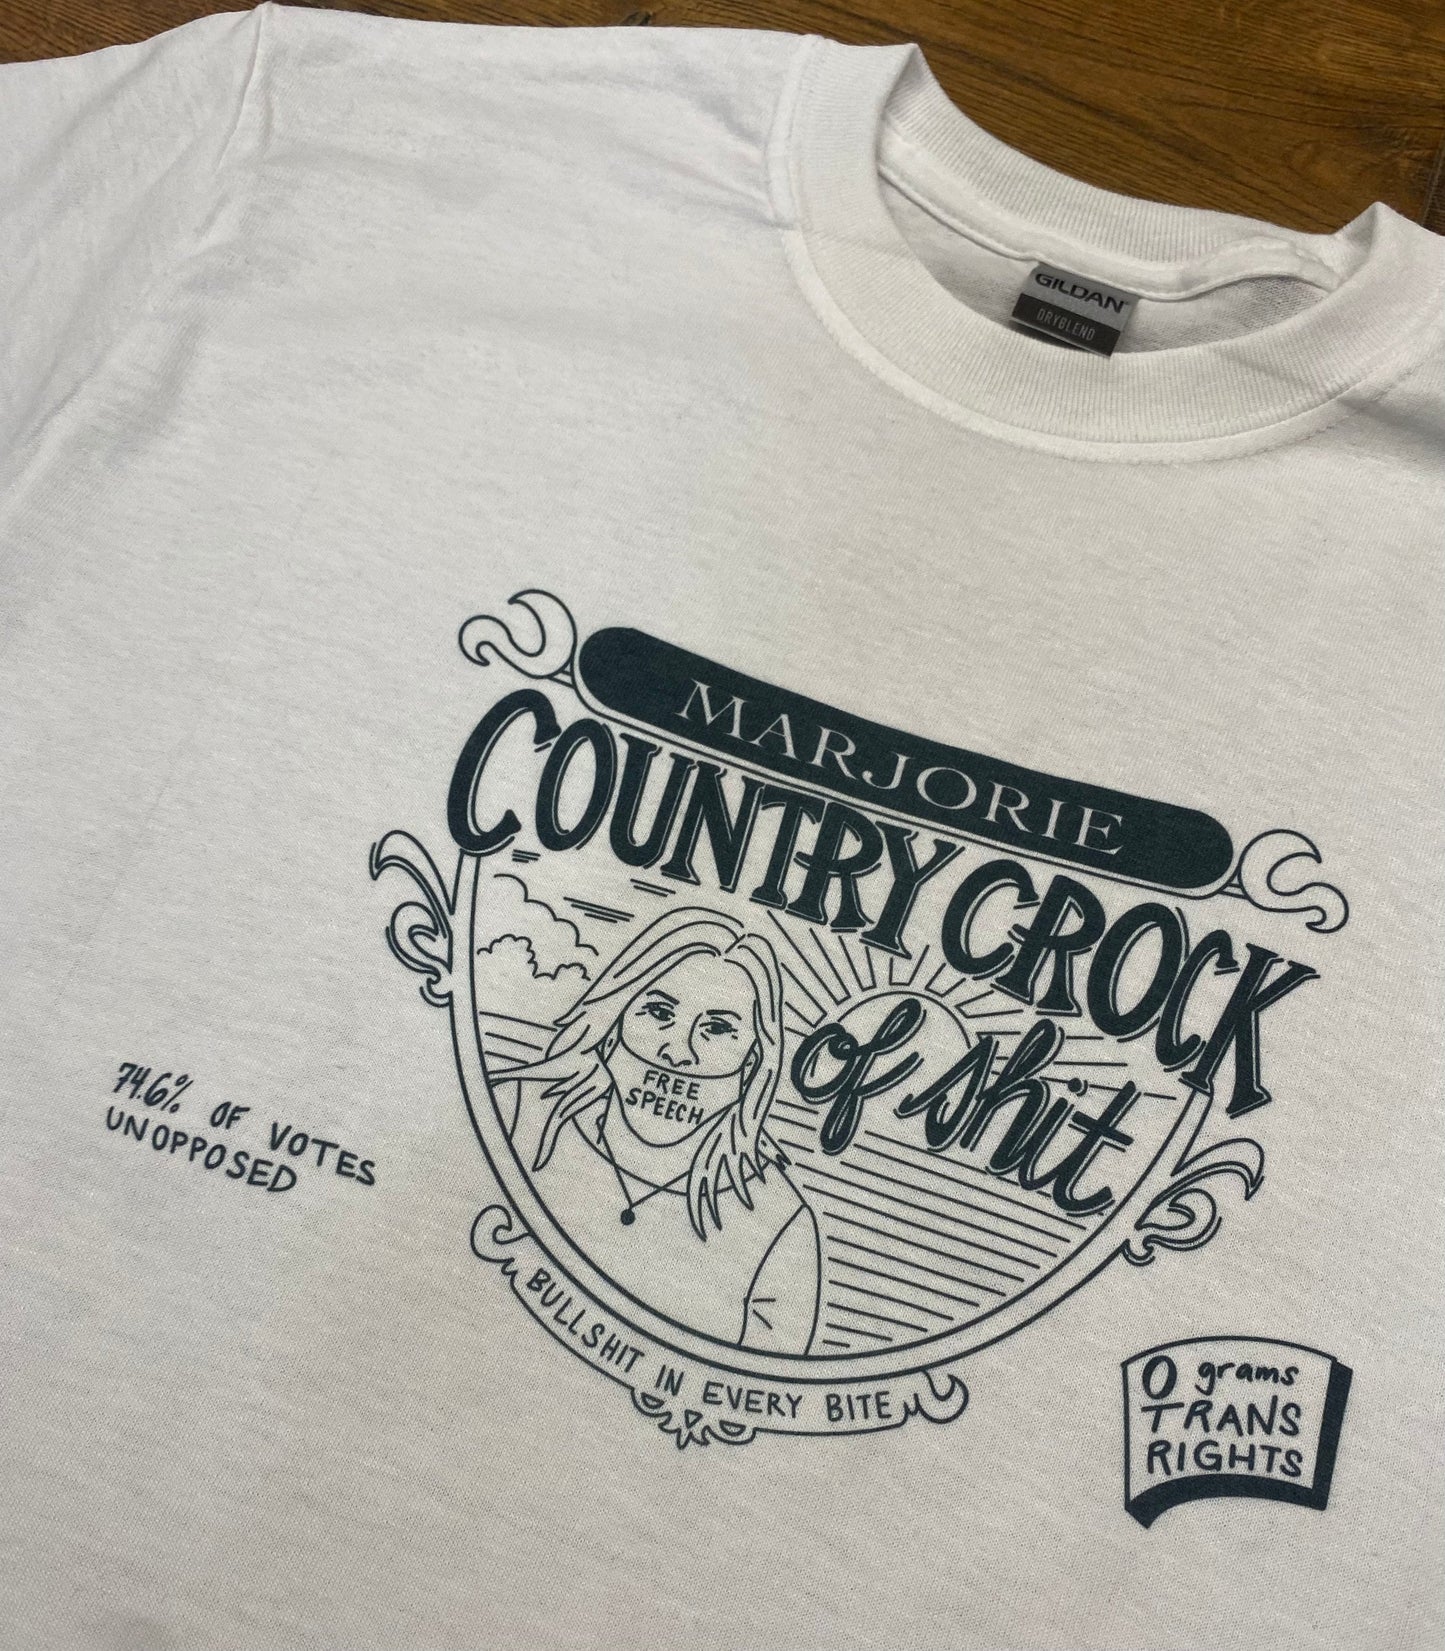 Marjorie Country Crock of Sh!t T Shirt